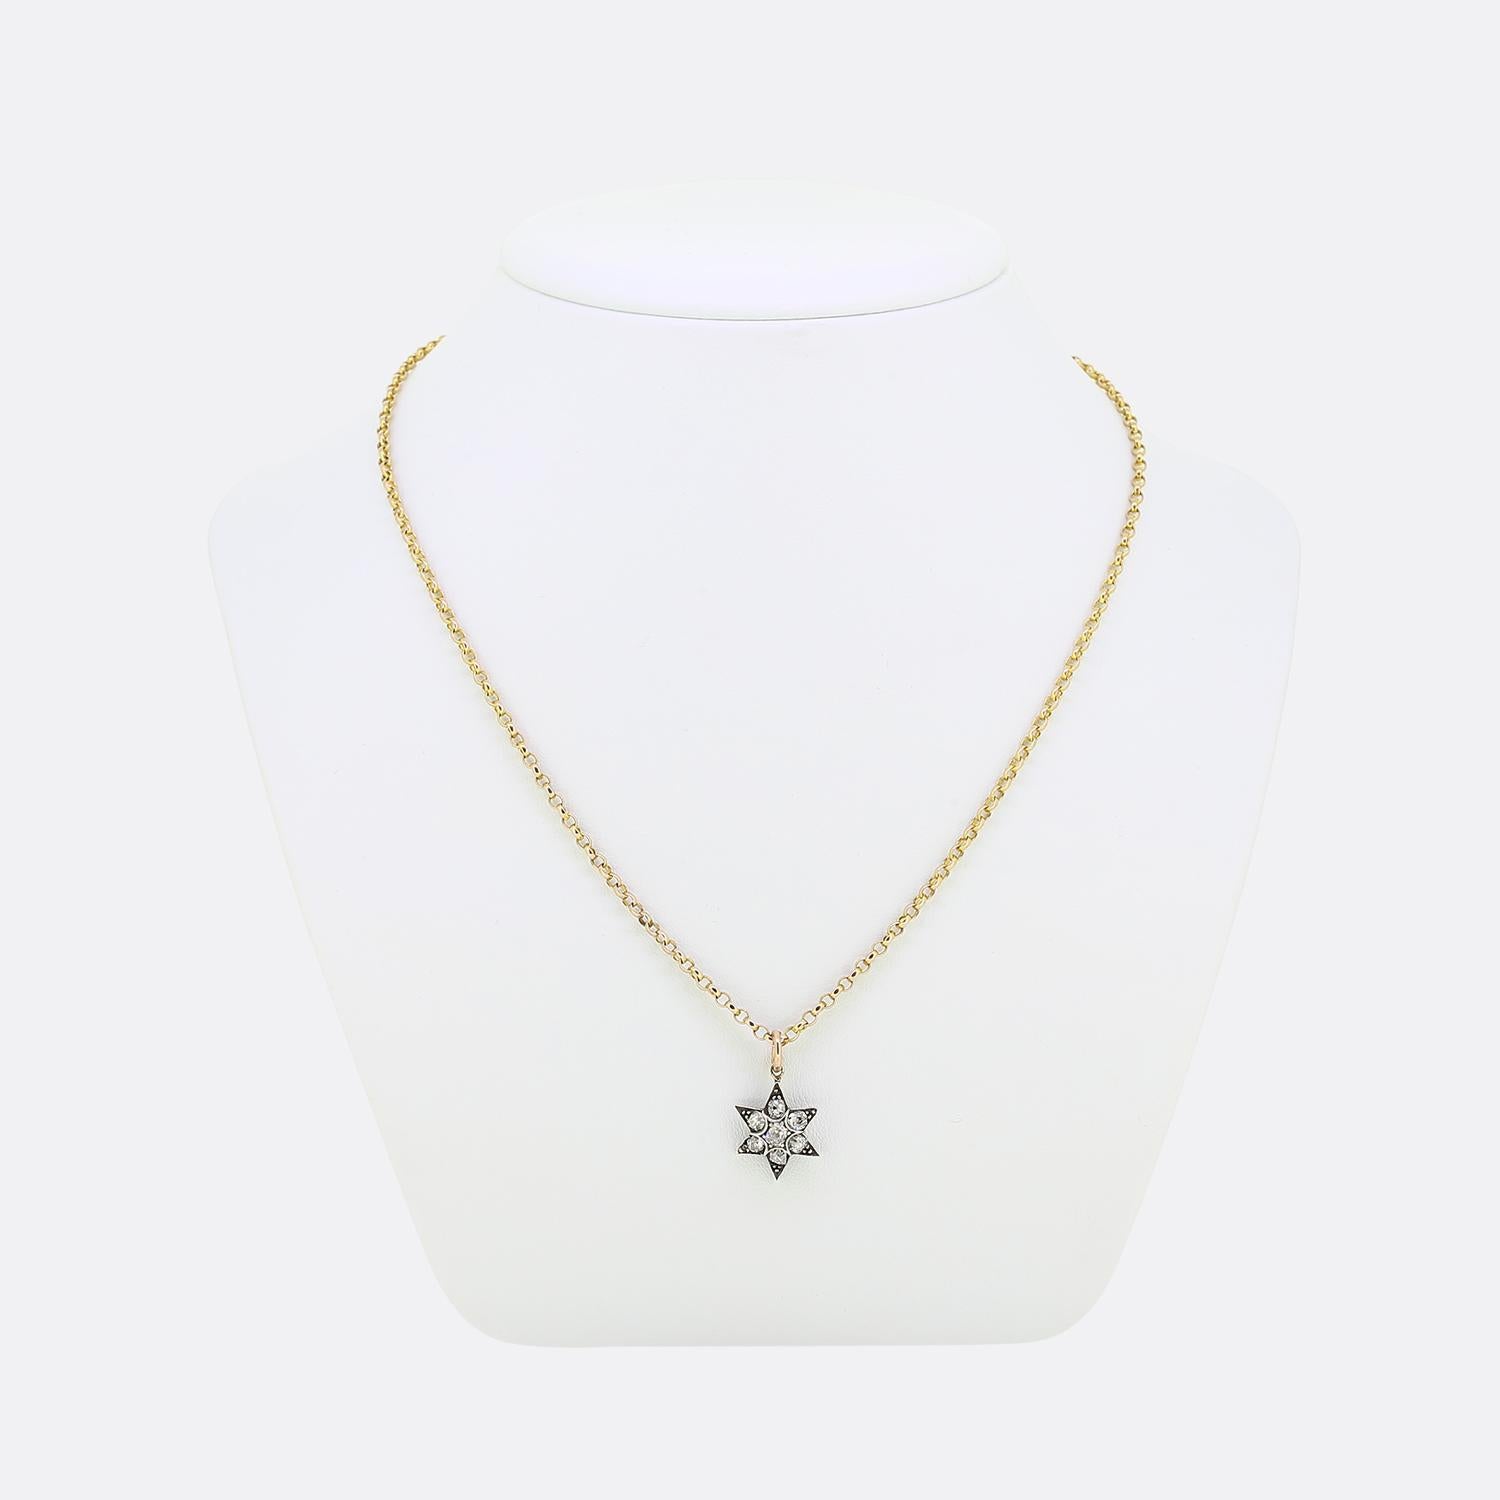 Here we have a stunning diamond set pendant necklace. This pendant has been crafted from sterling silver into the shape of six pointed, multilayered star. Each point has been individually claw set with a single old cut diamond with a matching stone